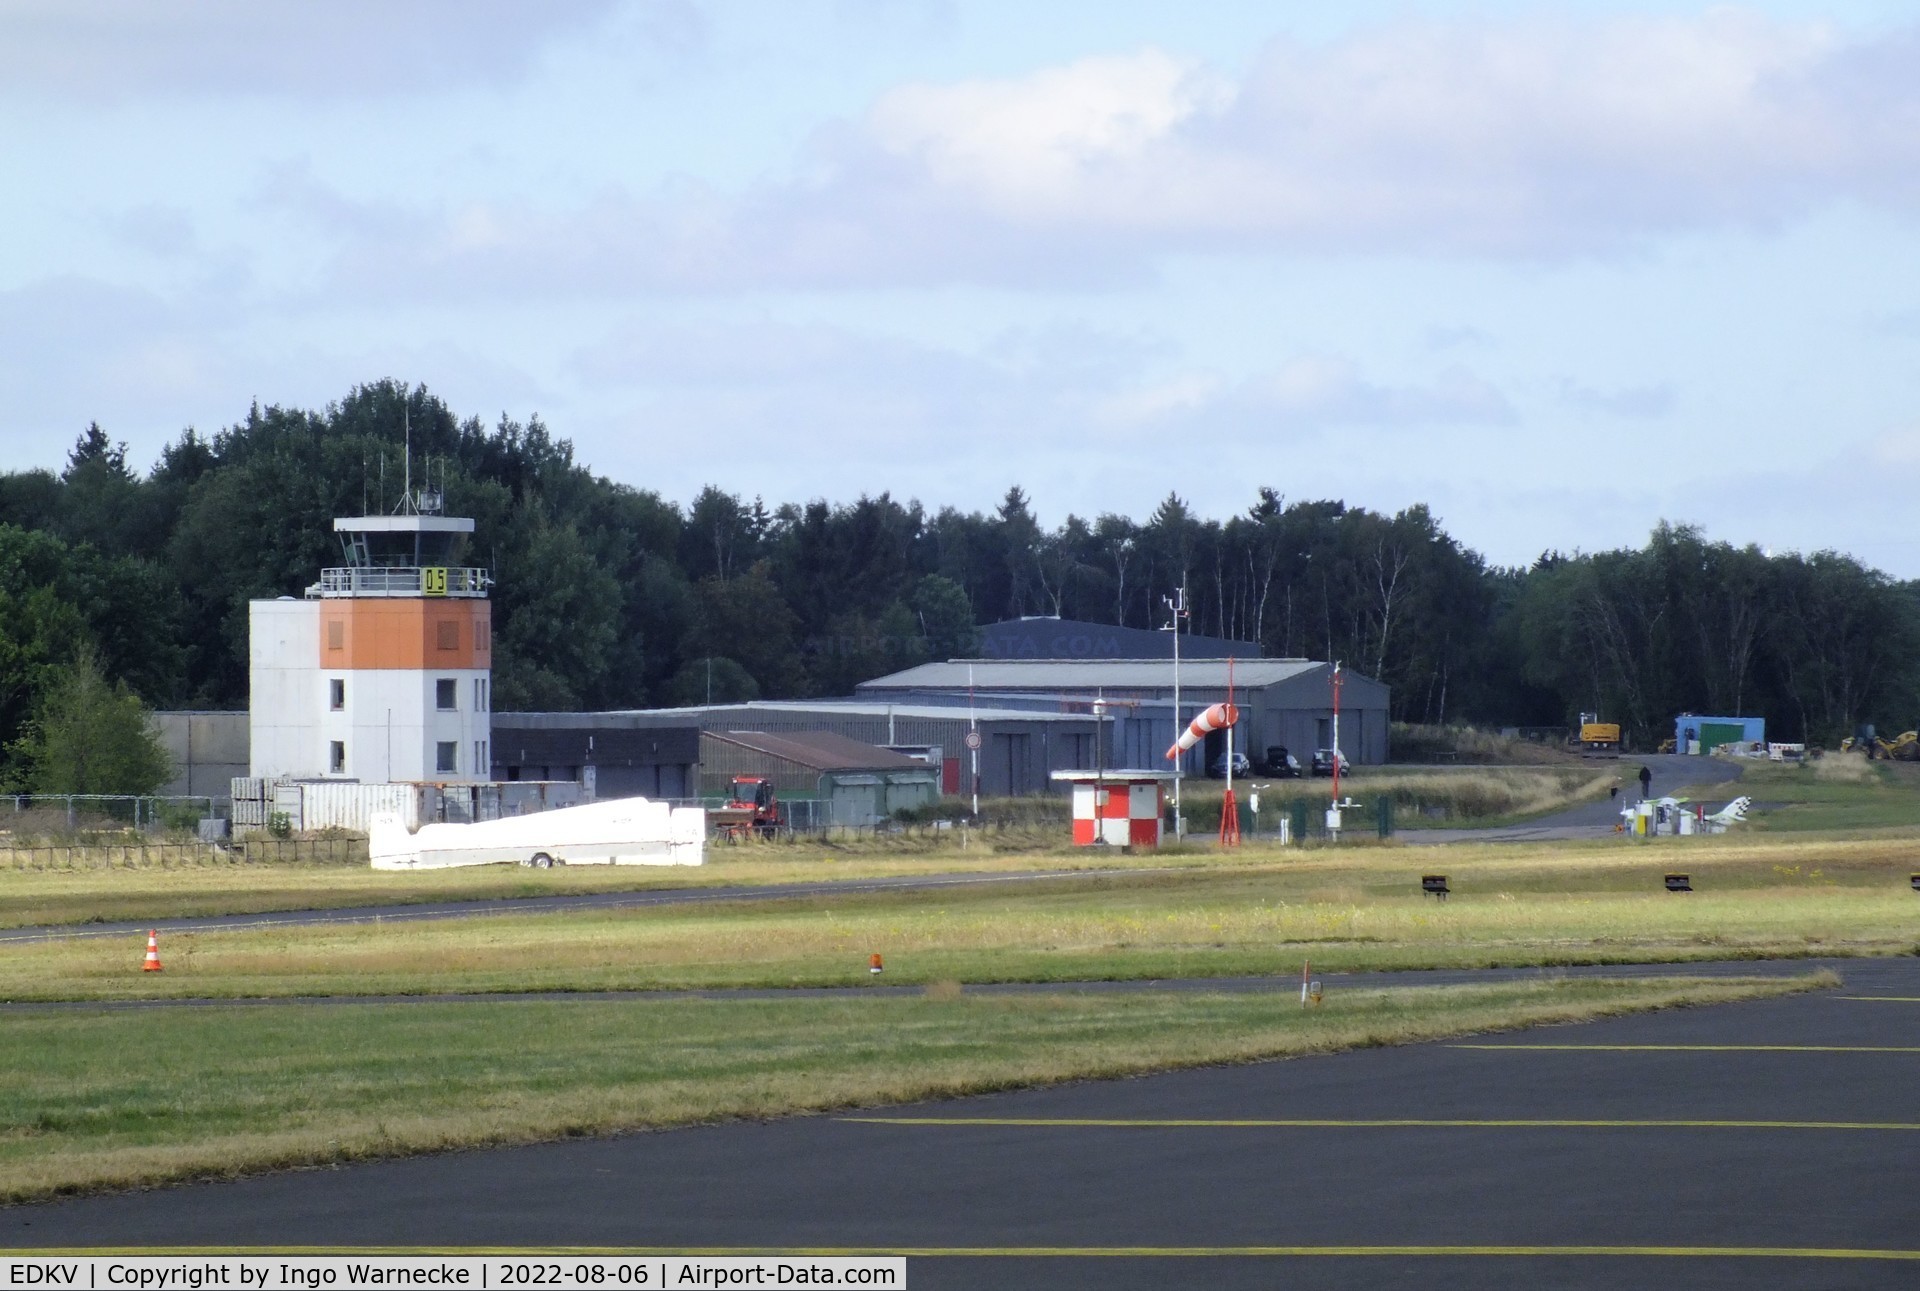 Dahlemer Binz Airport, Dahlem Germany (EDKV) - view across the airfield of the western hangars and tower at Dahlemer Binz airfield